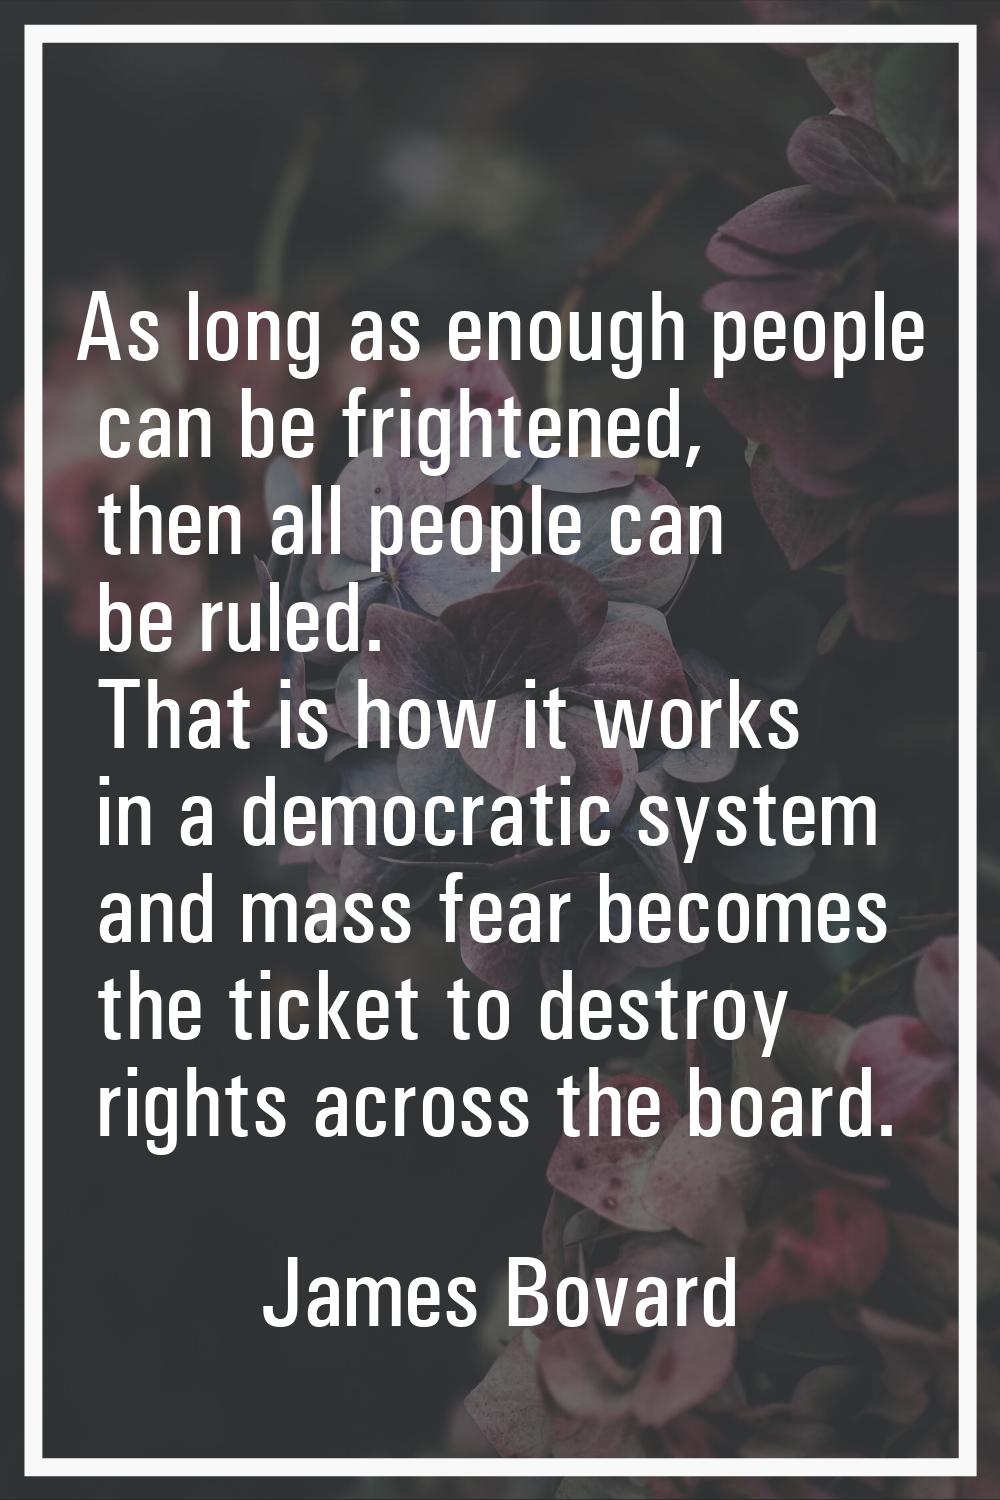 As long as enough people can be frightened, then all people can be ruled. That is how it works in a